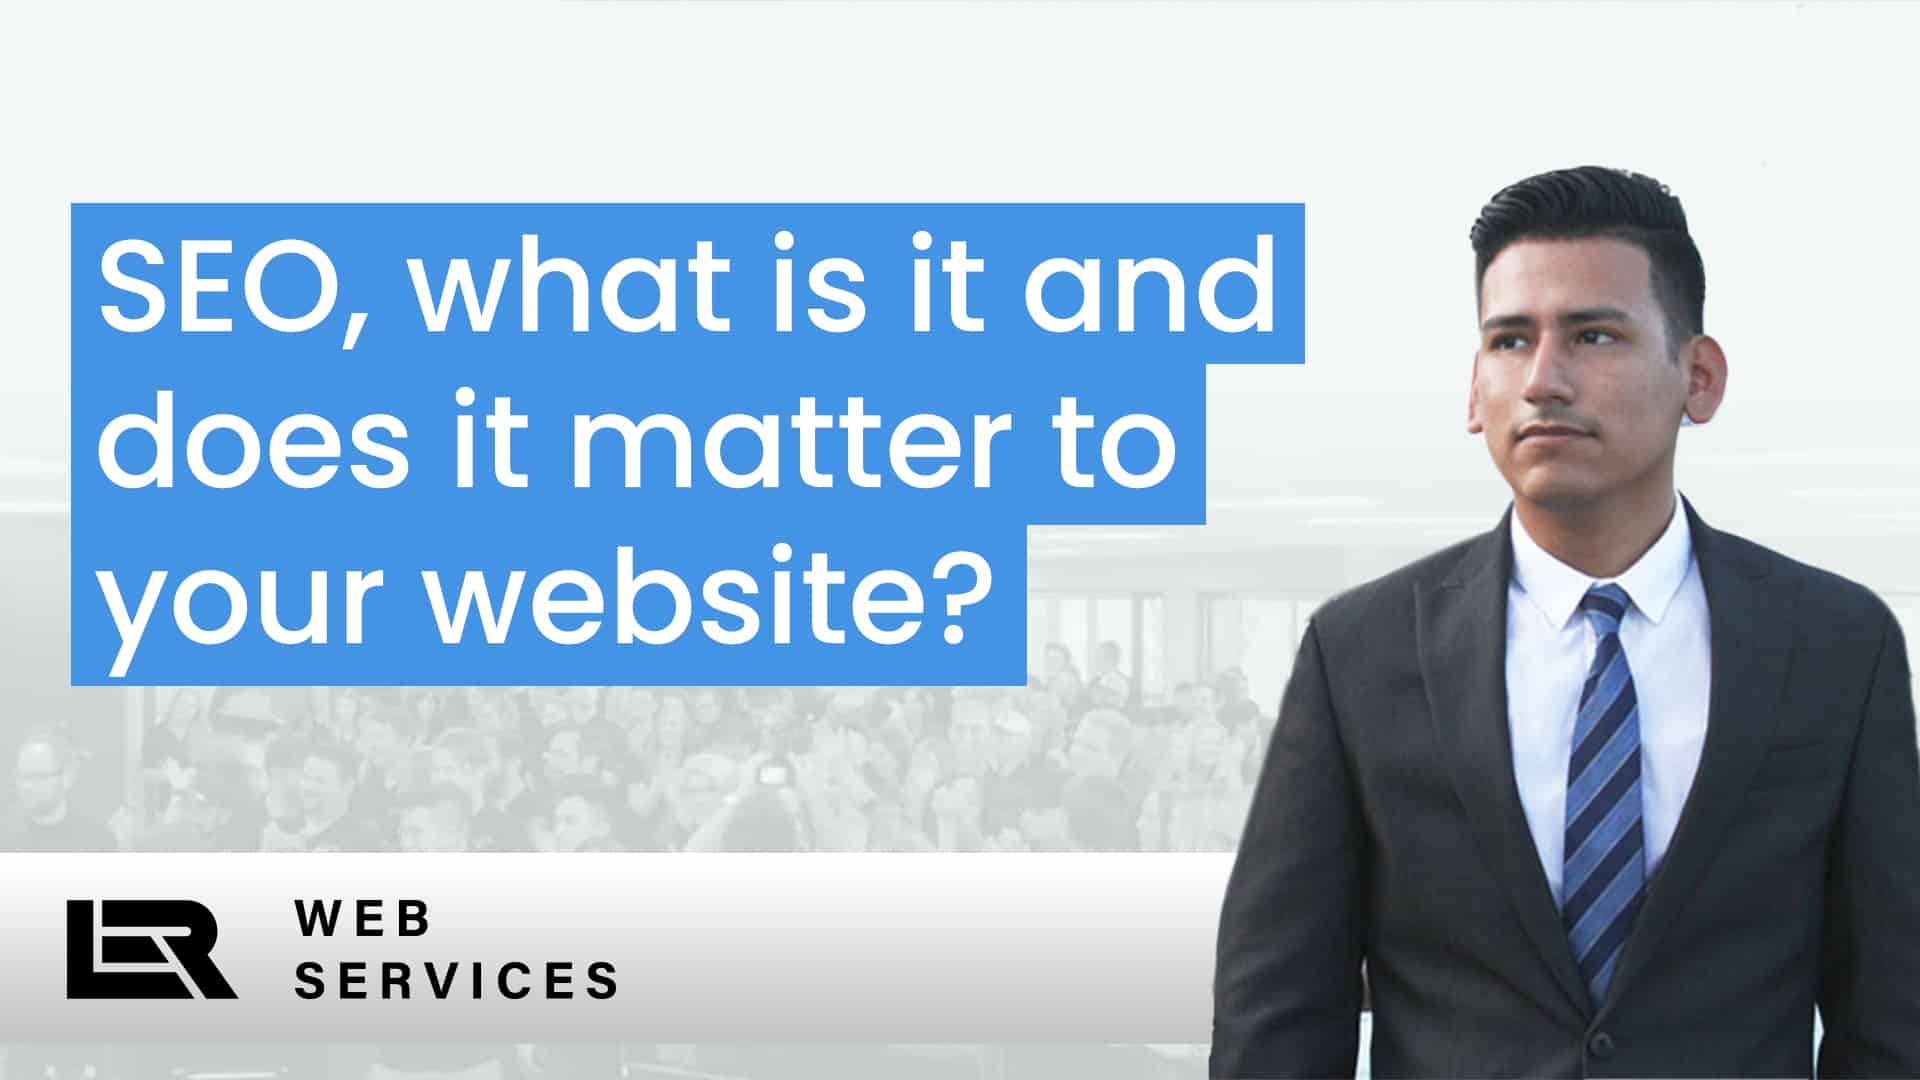 SEO, what is it and does it matter to your website?